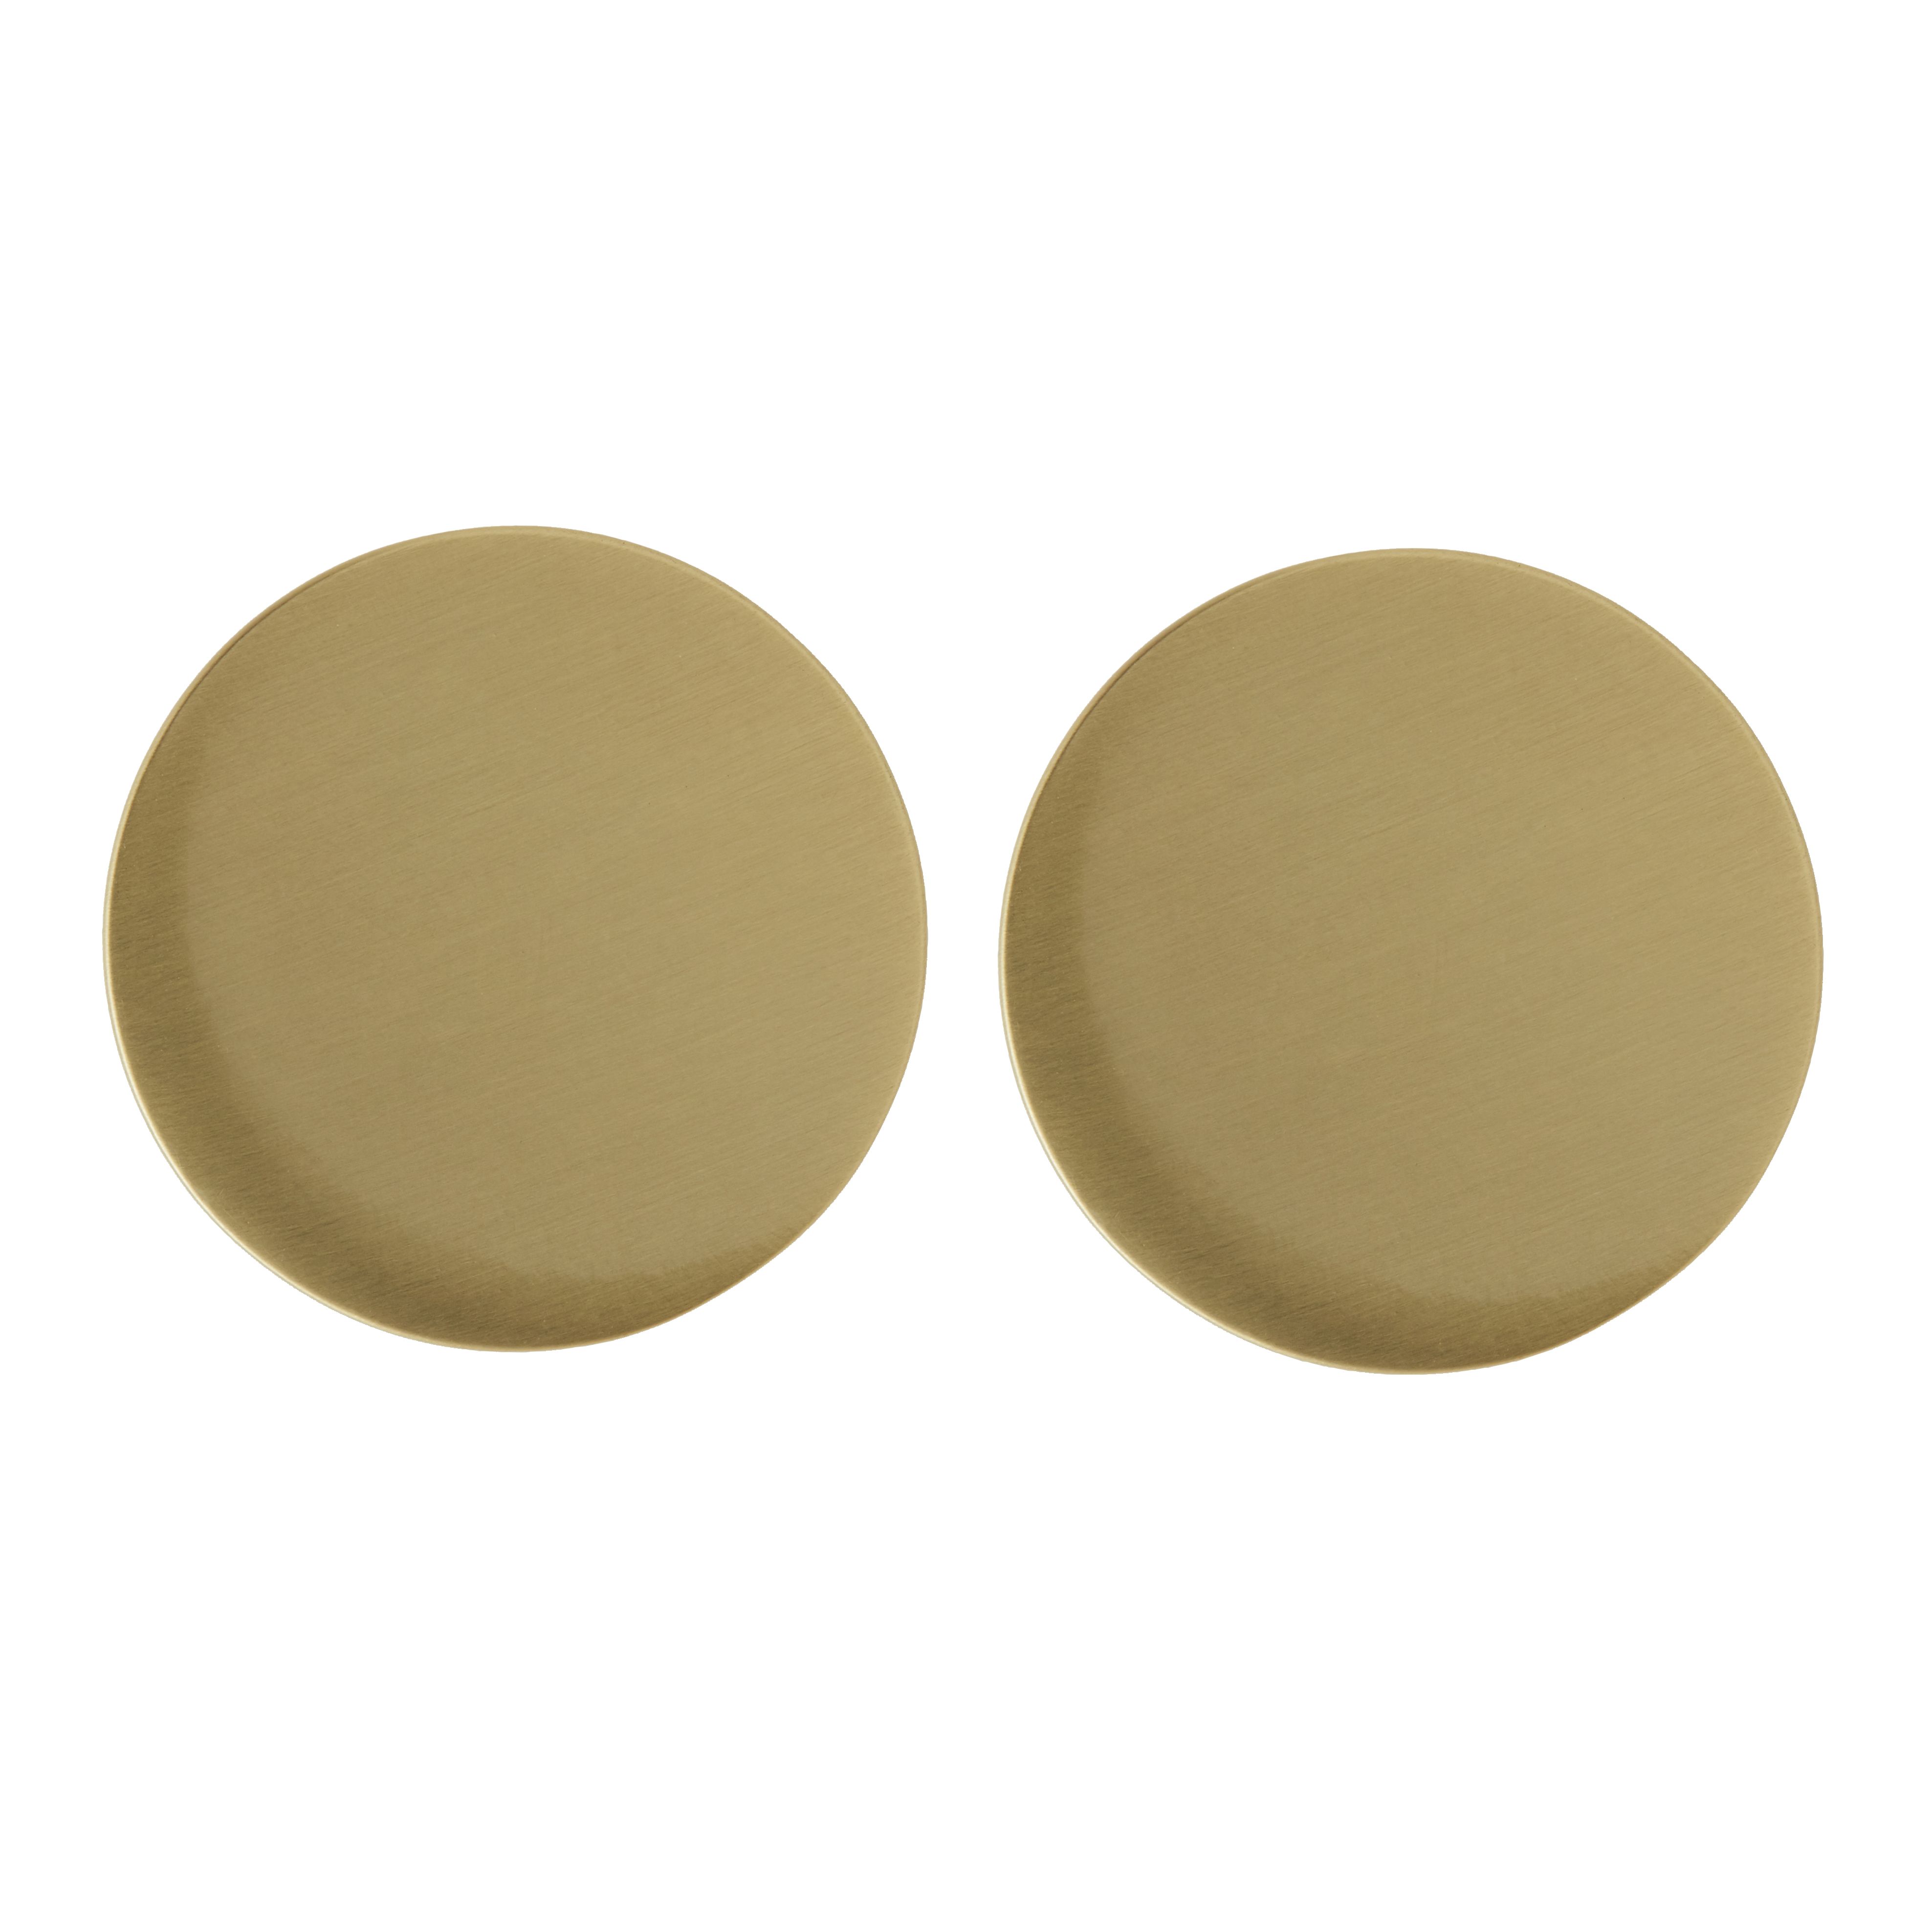 GoodHome Gomasio Brass effect Gold Kitchen cabinets Handle (L)2.6cm, Pack of 2